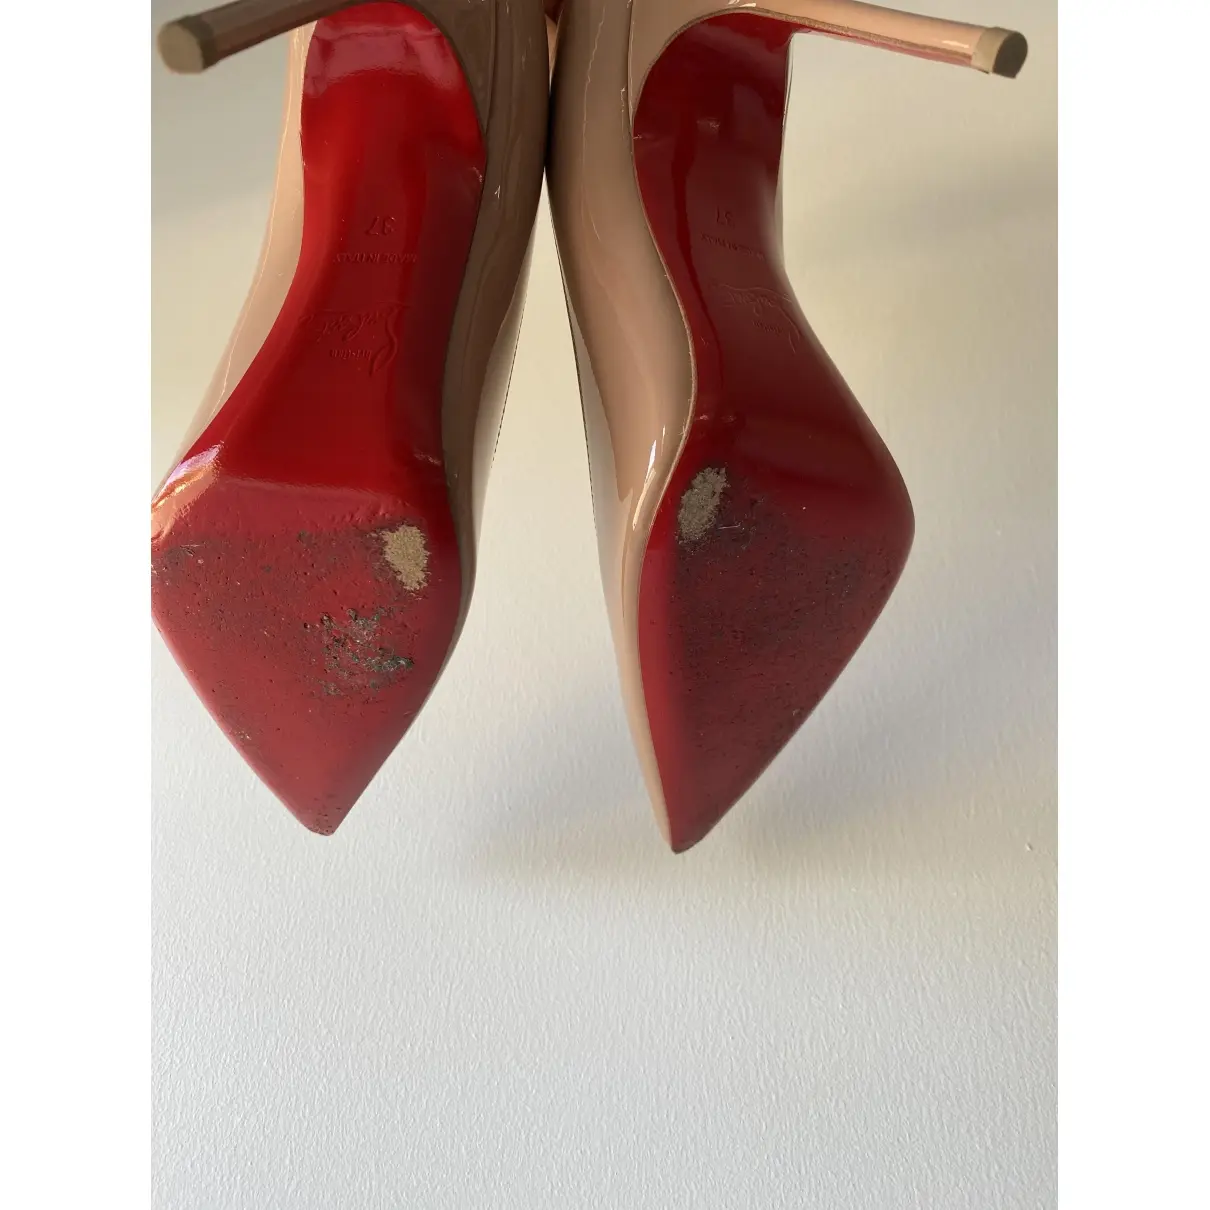 So Kate patent leather heels Christian Louboutin